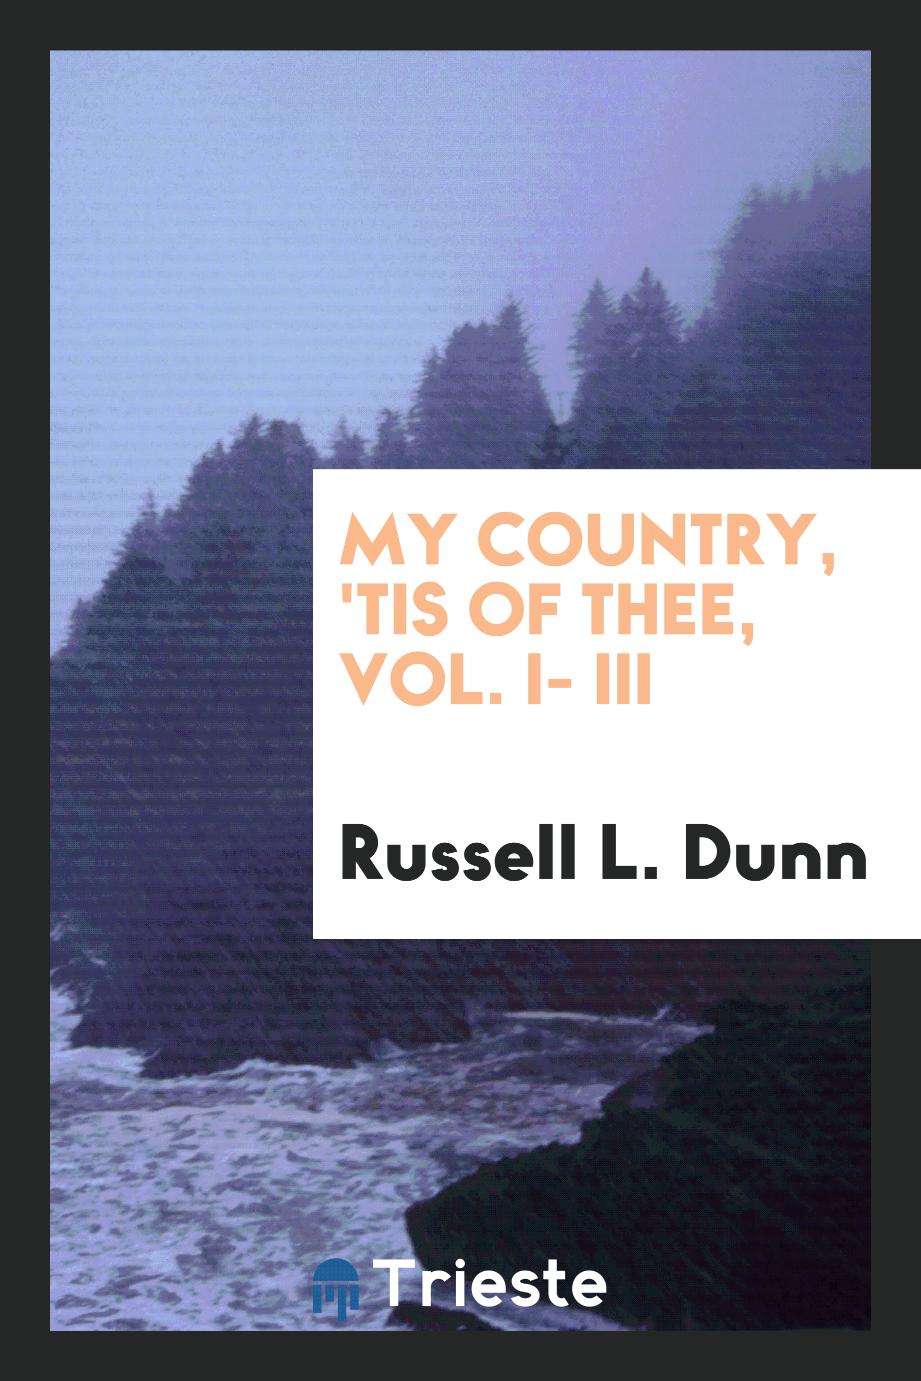 My country, 'tis of thee, Vol. I- III